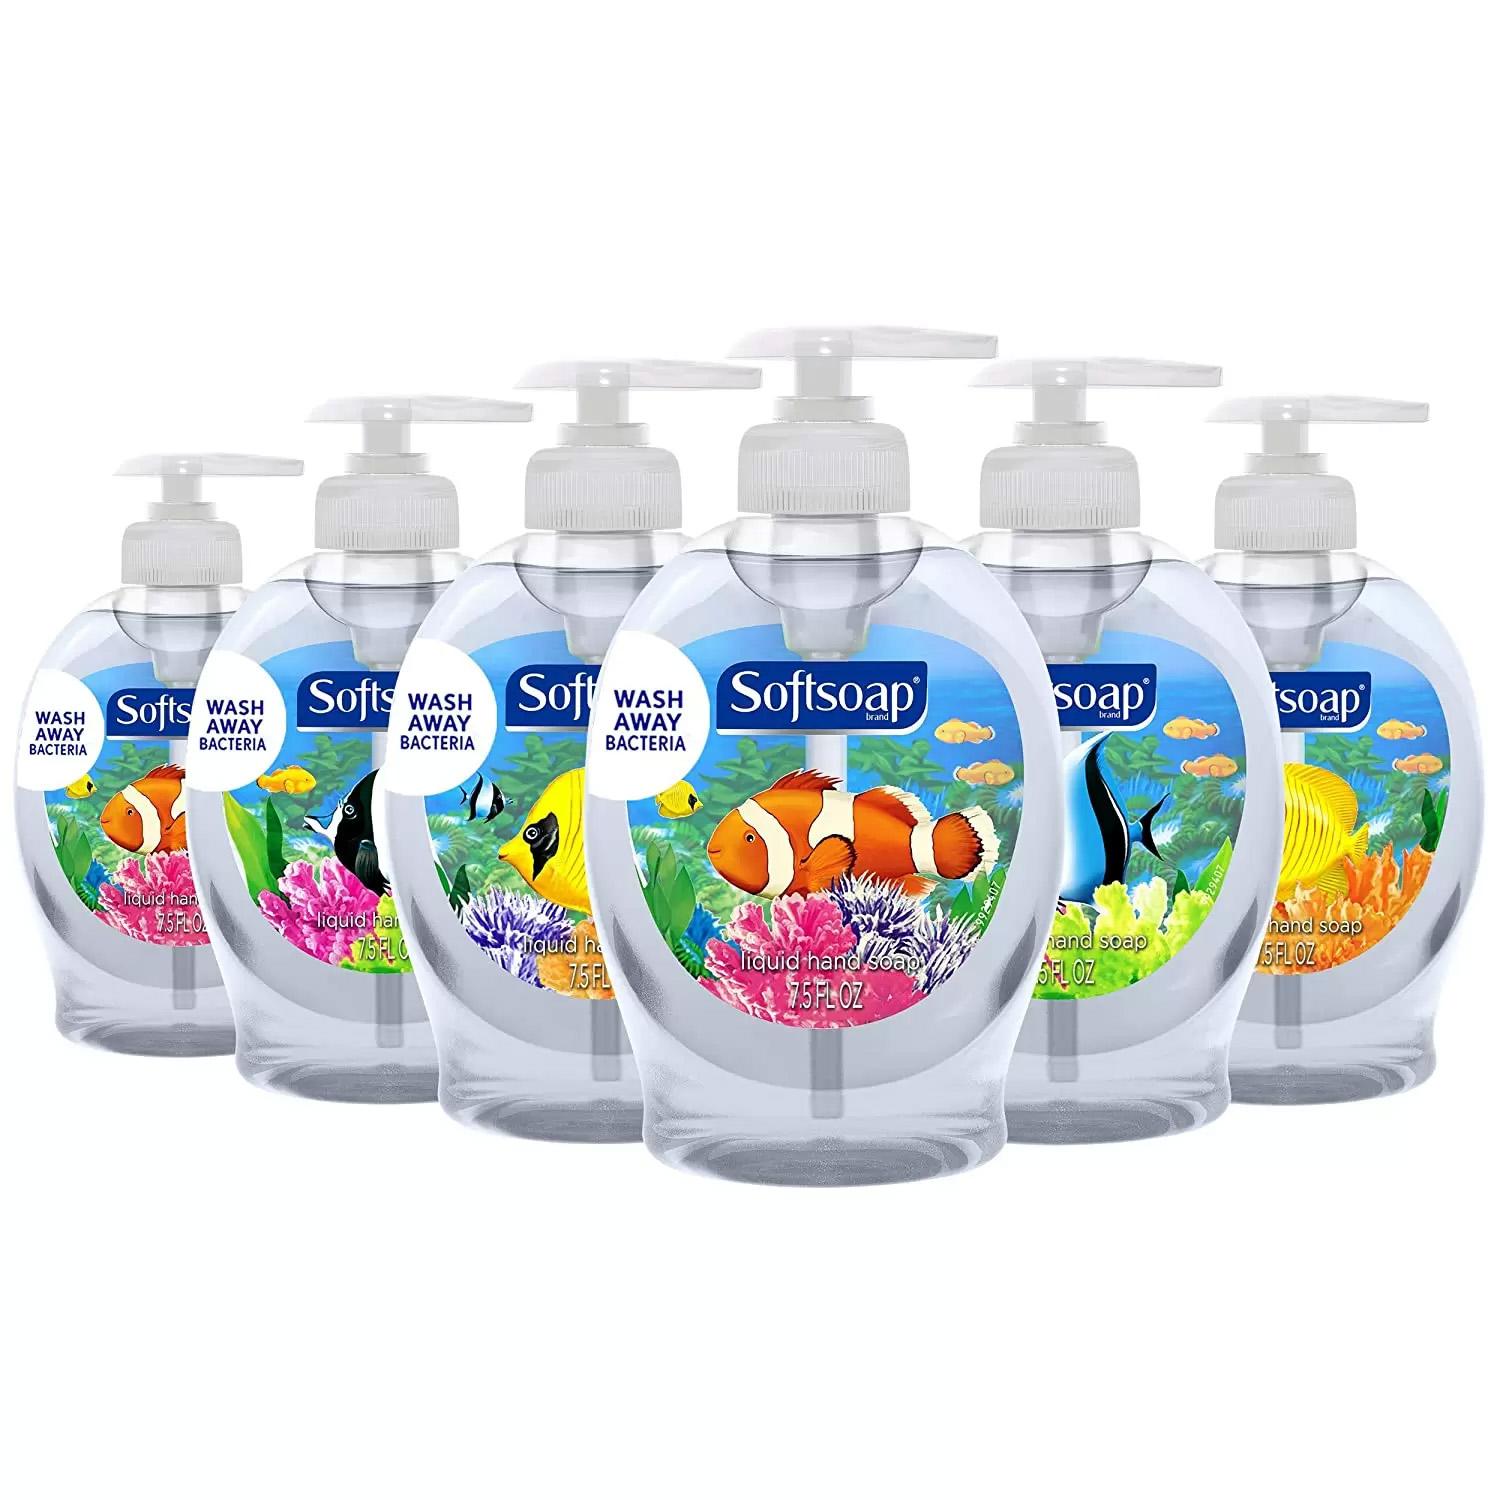 6 Softsoap Liquid Hand Soaps for $4.14 Shipped